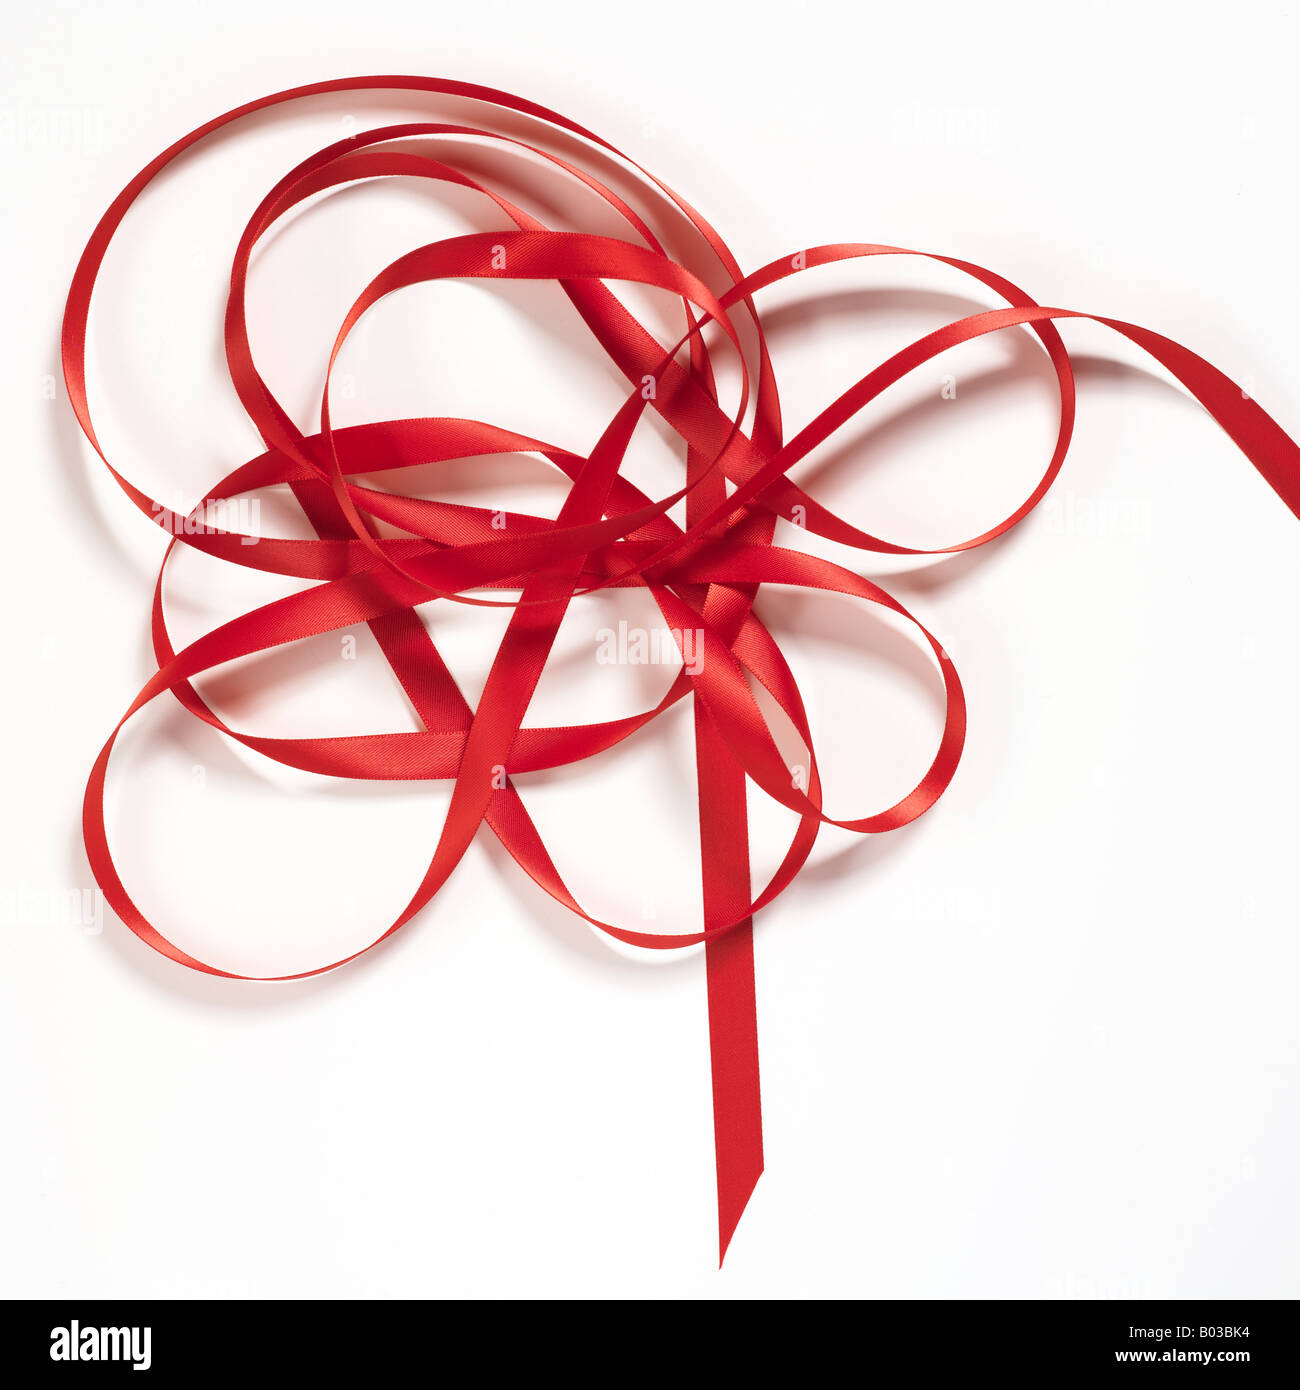 red satin ribbon curls on white background Stock Photo